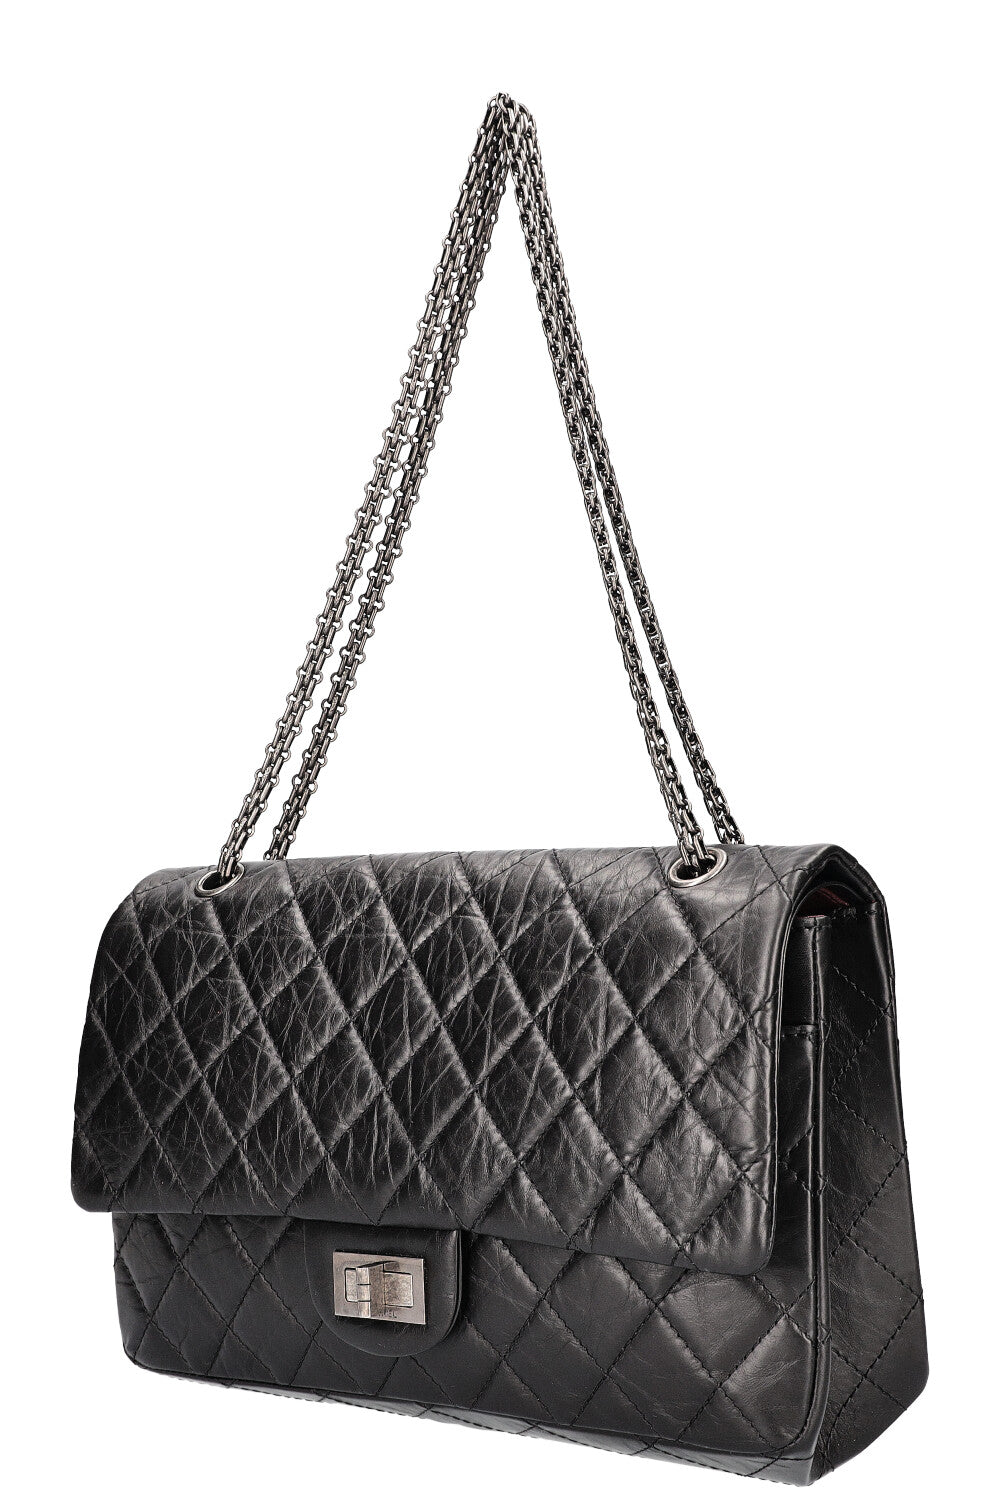 Chanel Reissue 227 Maxi 2.55 Flap in Black Aged Calfskin with Ruthenium  Hardware - SOLD